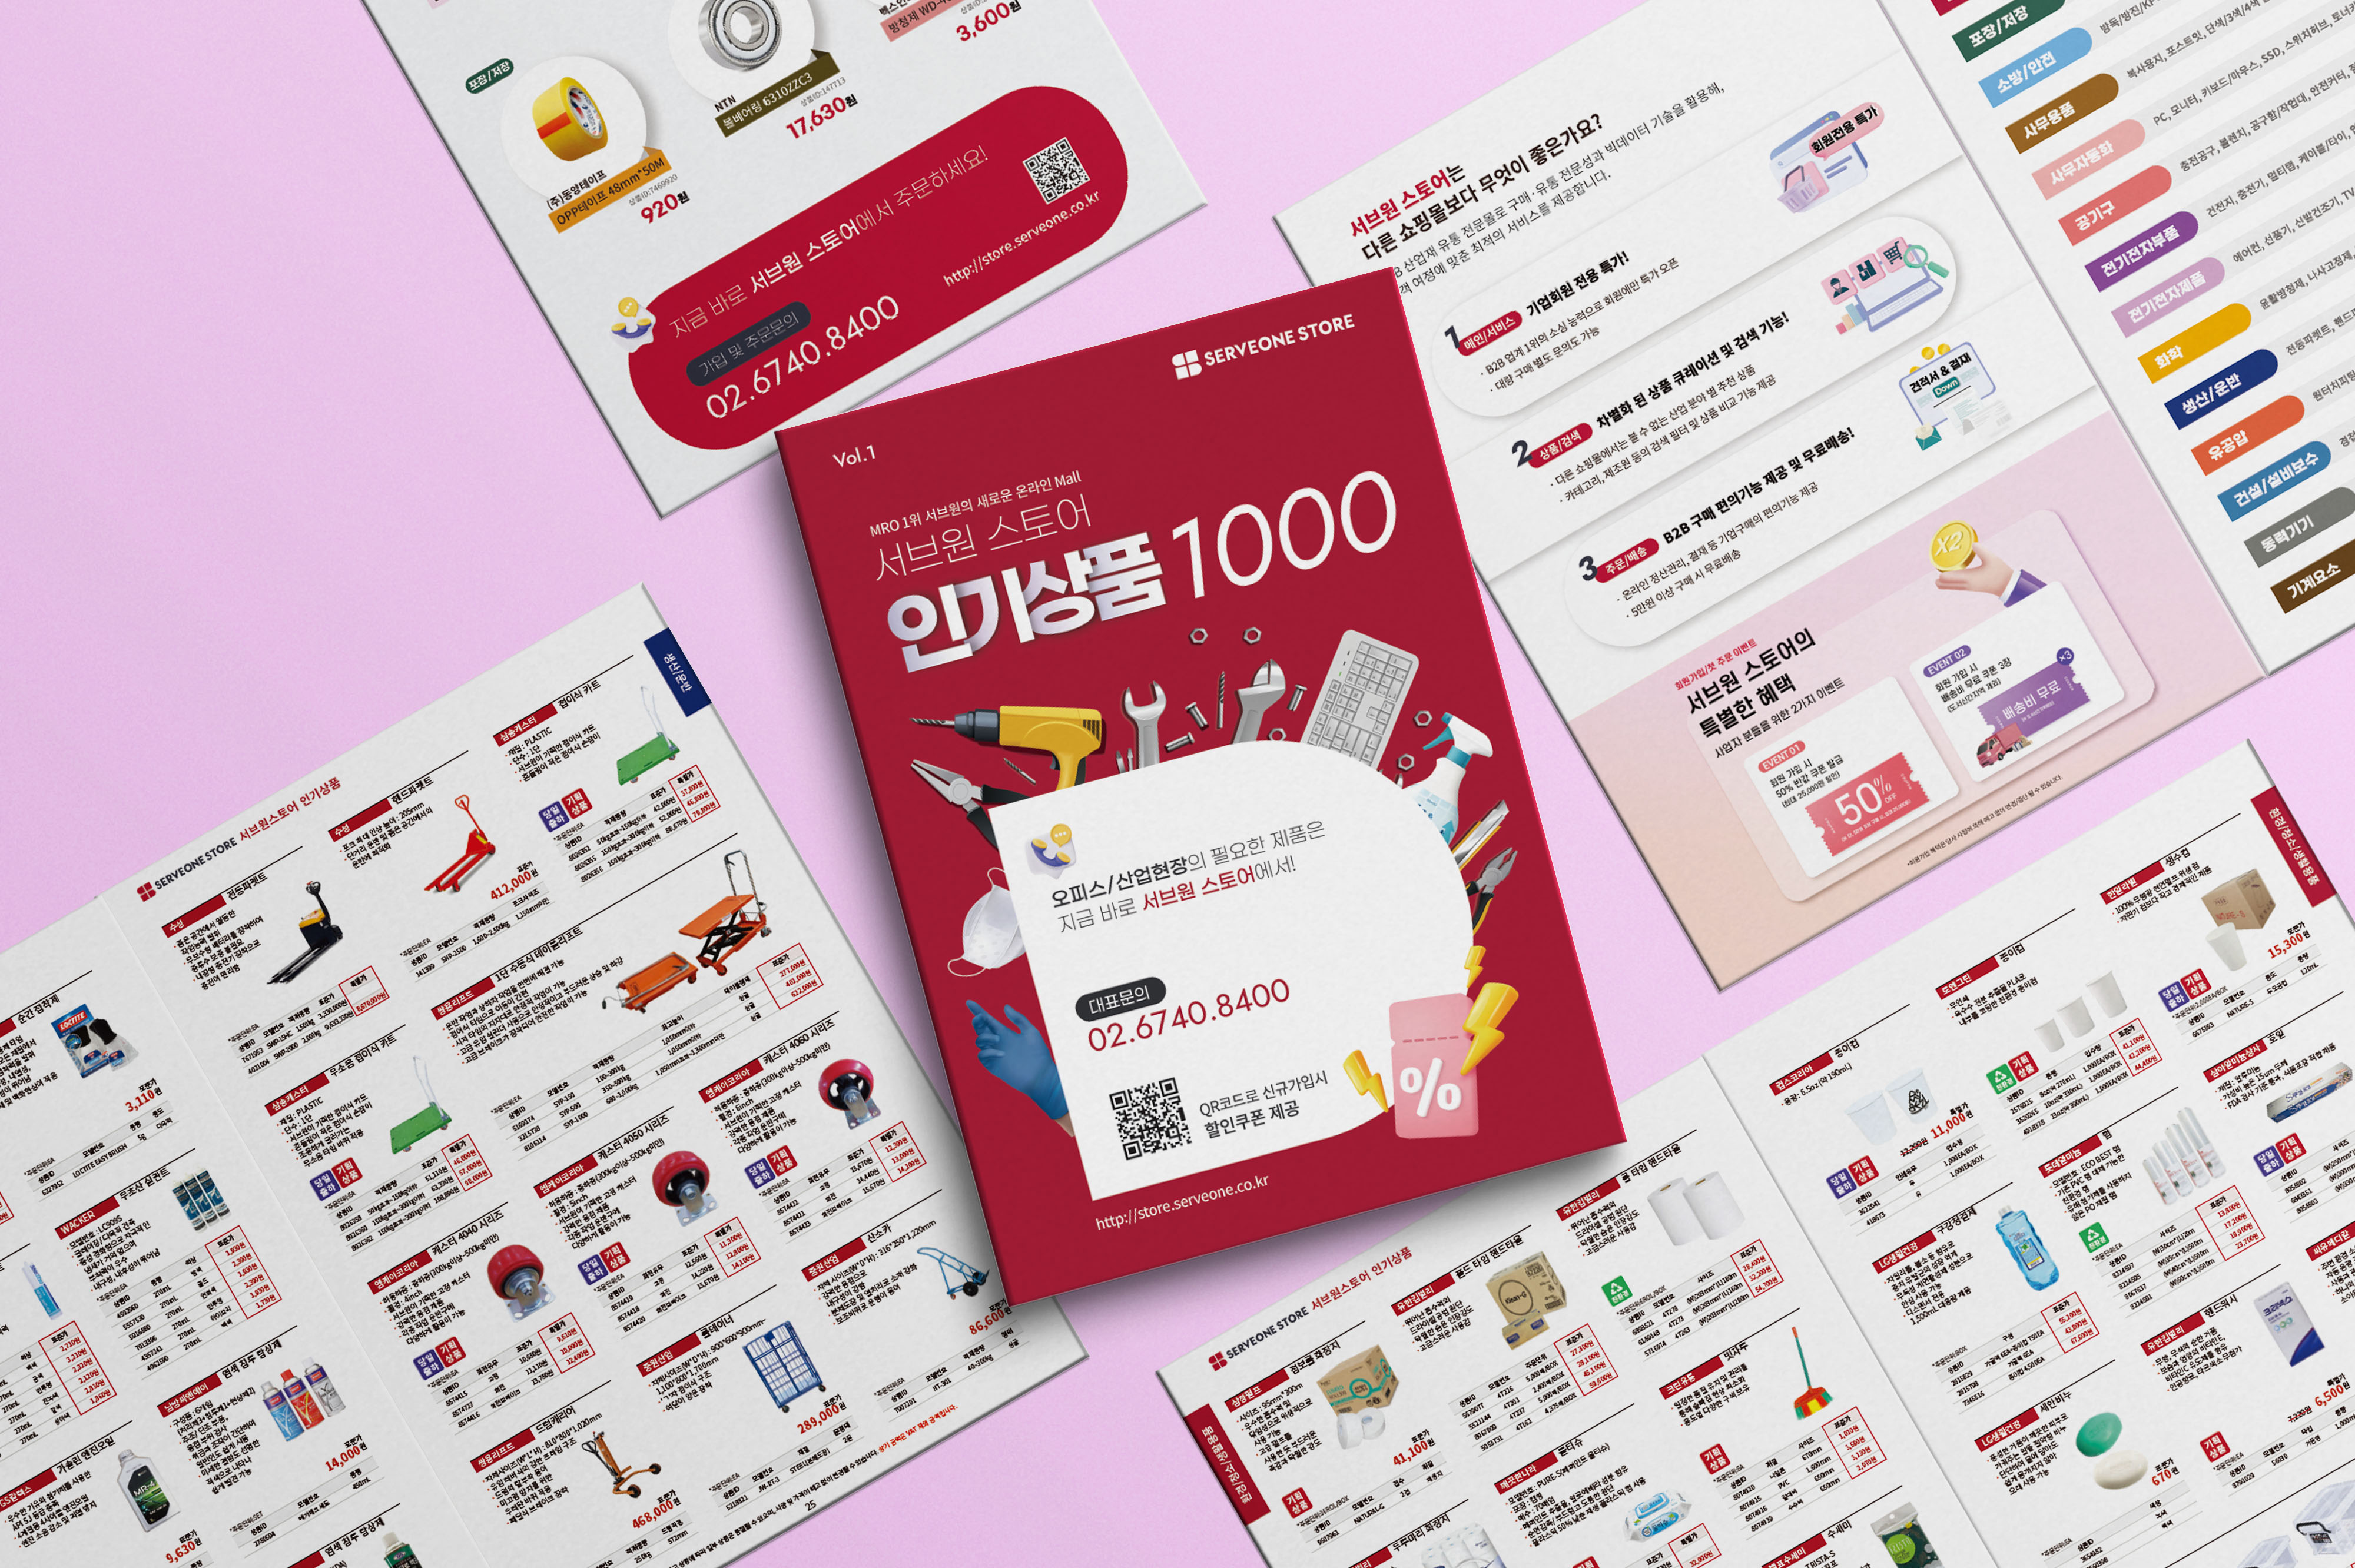 SERVEONE publishes catalog  for “1,000 Popular Items at SERVEONE Store”